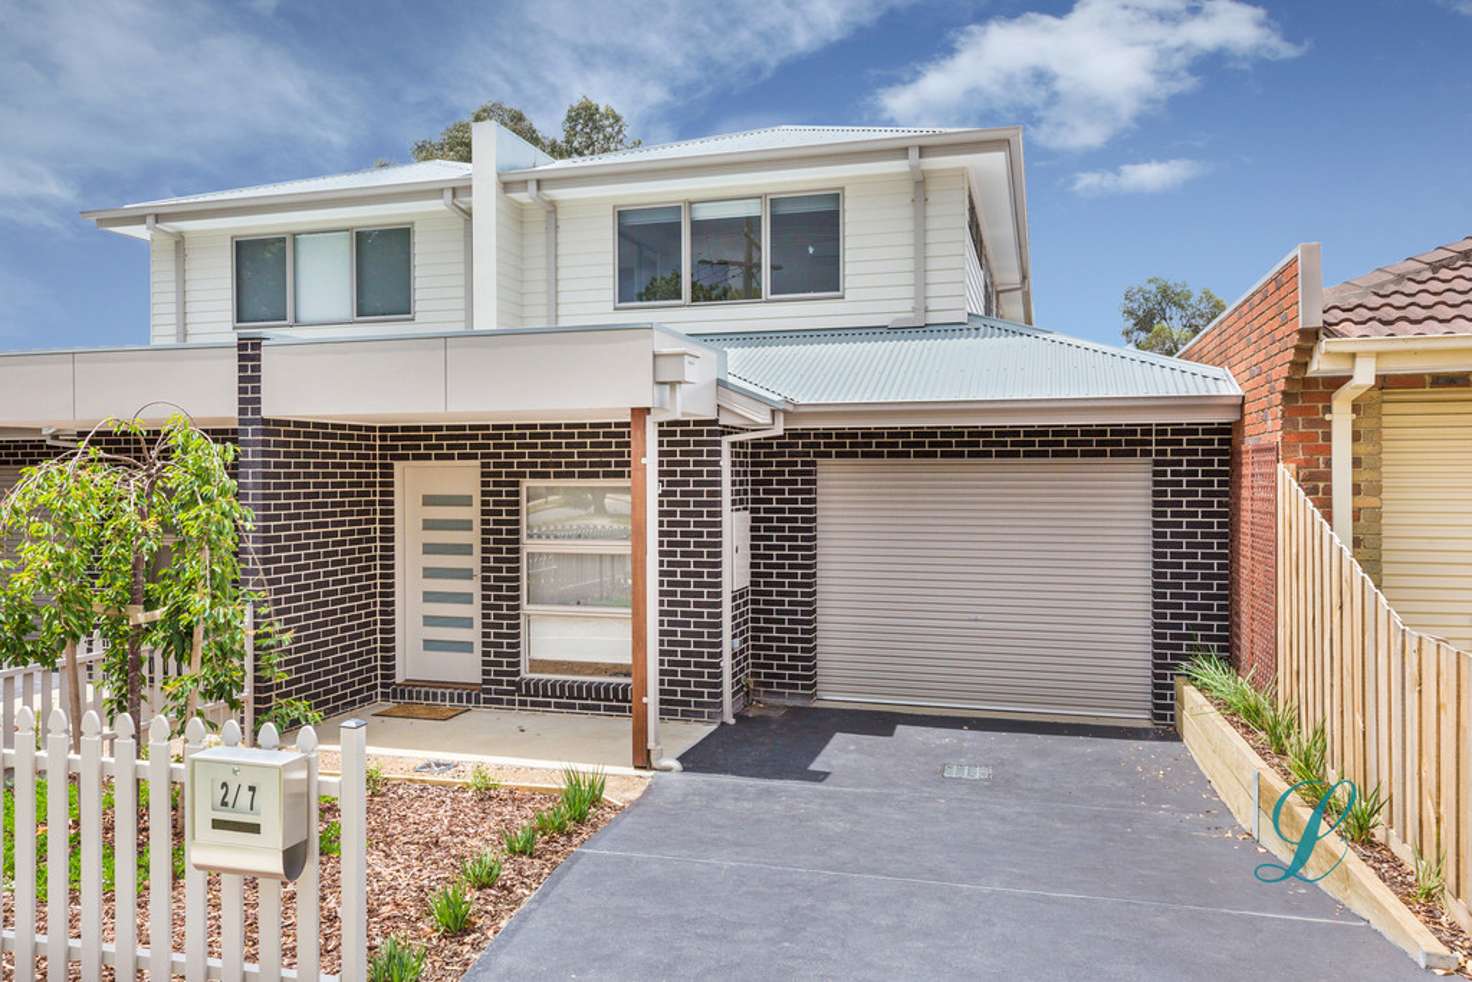 Main view of Homely townhouse listing, 2/7 Blaxland Drive, Sunbury VIC 3429